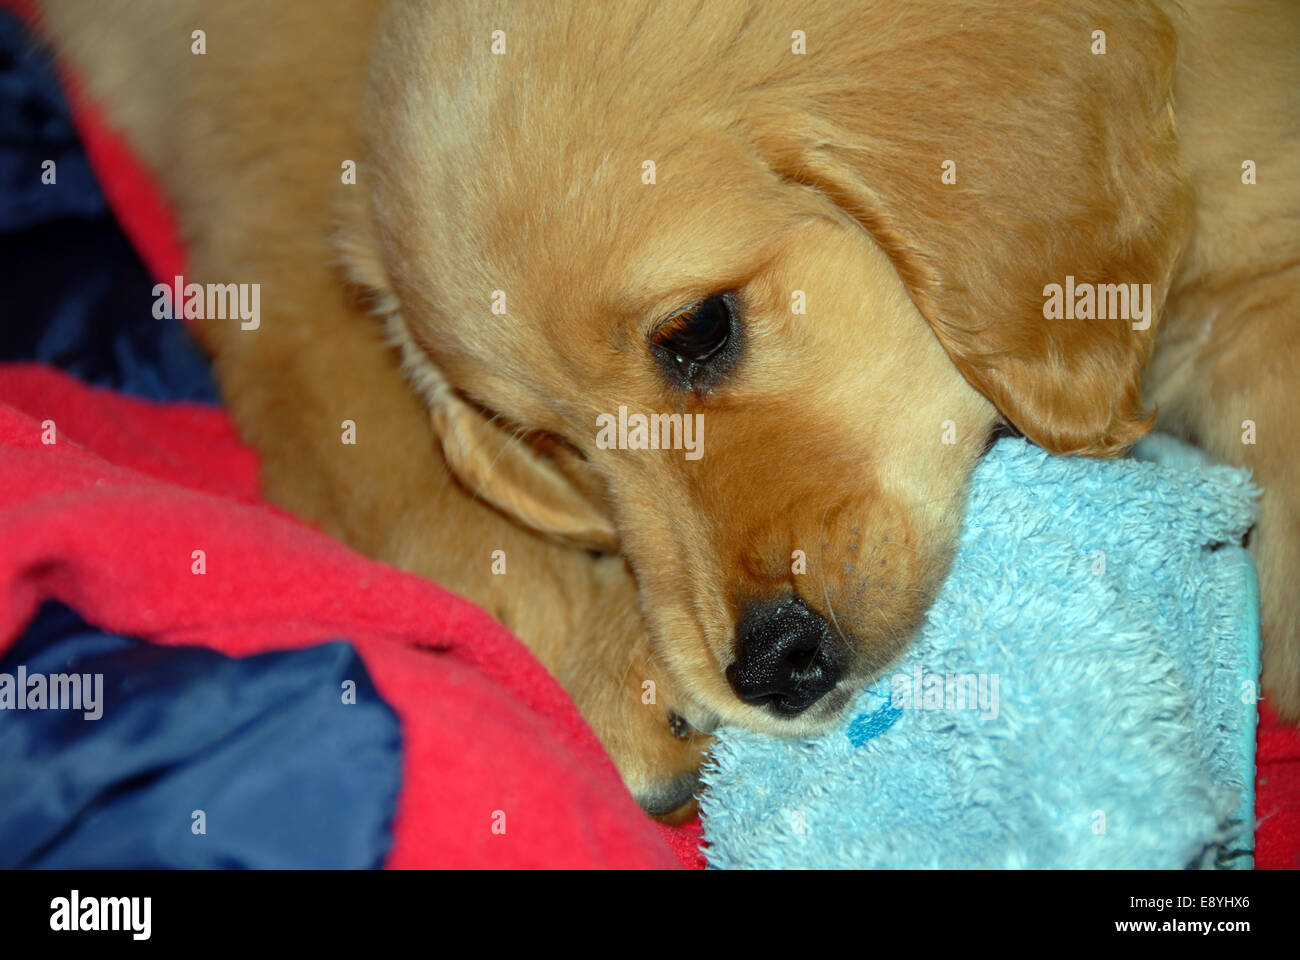 Dog gnawing a slipper Stock Photo